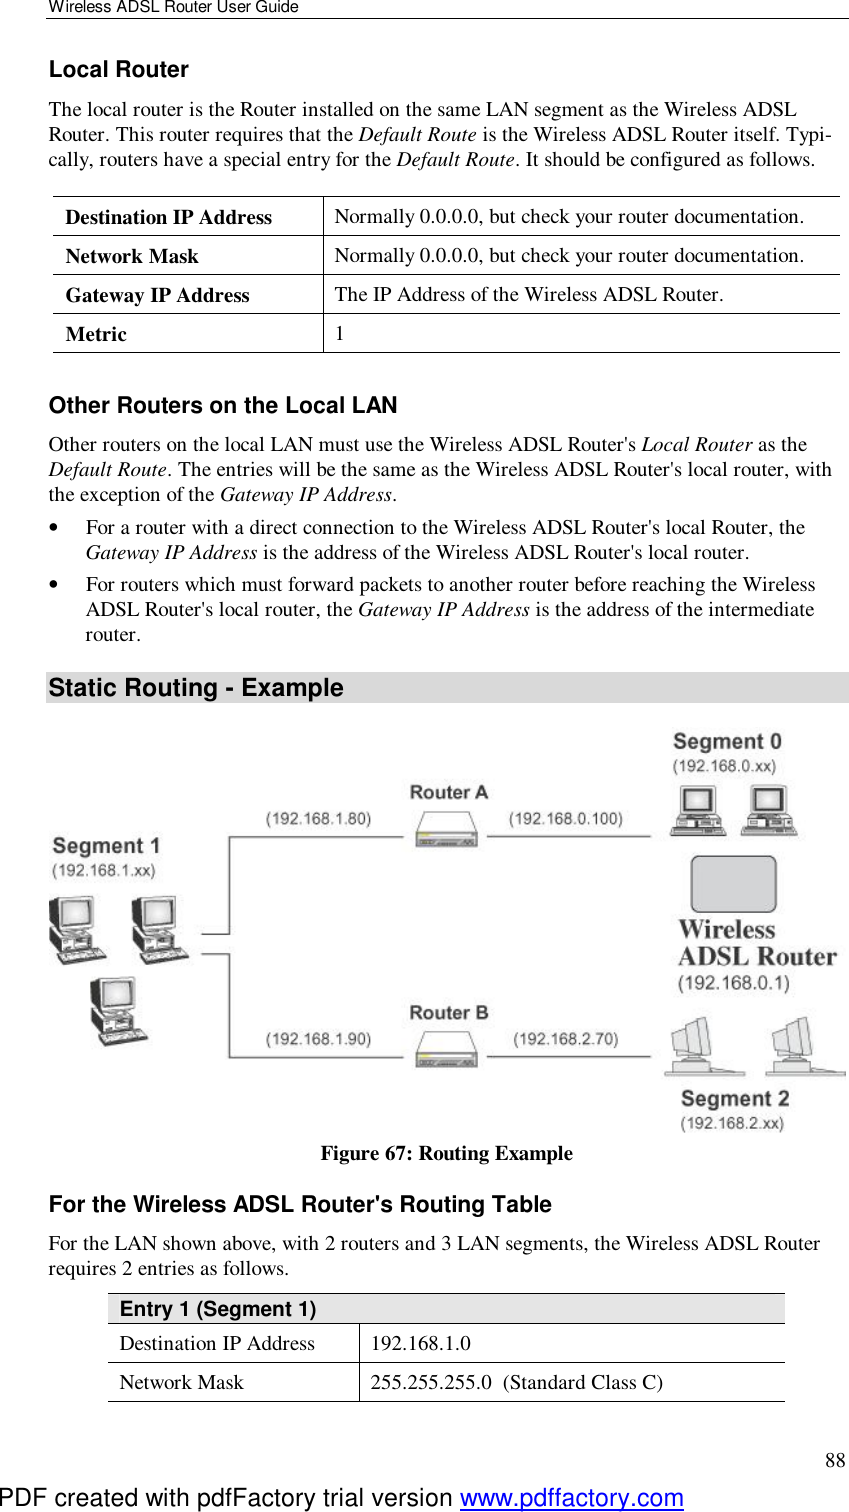 Wireless ADSL Router User Guide 88 Local Router The local router is the Router installed on the same LAN segment as the Wireless ADSL Router. This router requires that the Default Route is the Wireless ADSL Router itself. Typi-cally, routers have a special entry for the Default Route. It should be configured as follows. Destination IP Address  Normally 0.0.0.0, but check your router documentation. Network Mask   Normally 0.0.0.0, but check your router documentation. Gateway IP Address  The IP Address of the Wireless ADSL Router. Metric  1  Other Routers on the Local LAN Other routers on the local LAN must use the Wireless ADSL Router&apos;s Local Router as the Default Route. The entries will be the same as the Wireless ADSL Router&apos;s local router, with the exception of the Gateway IP Address. •  For a router with a direct connection to the Wireless ADSL Router&apos;s local Router, the Gateway IP Address is the address of the Wireless ADSL Router&apos;s local router. •  For routers which must forward packets to another router before reaching the Wireless ADSL Router&apos;s local router, the Gateway IP Address is the address of the intermediate router. Static Routing - Example  Figure 67: Routing Example For the Wireless ADSL Router&apos;s Routing Table For the LAN shown above, with 2 routers and 3 LAN segments, the Wireless ADSL Router requires 2 entries as follows. Entry 1 (Segment 1) Destination IP Address  192.168.1.0 Network Mask  255.255.255.0  (Standard Class C) PDF created with pdfFactory trial version www.pdffactory.com